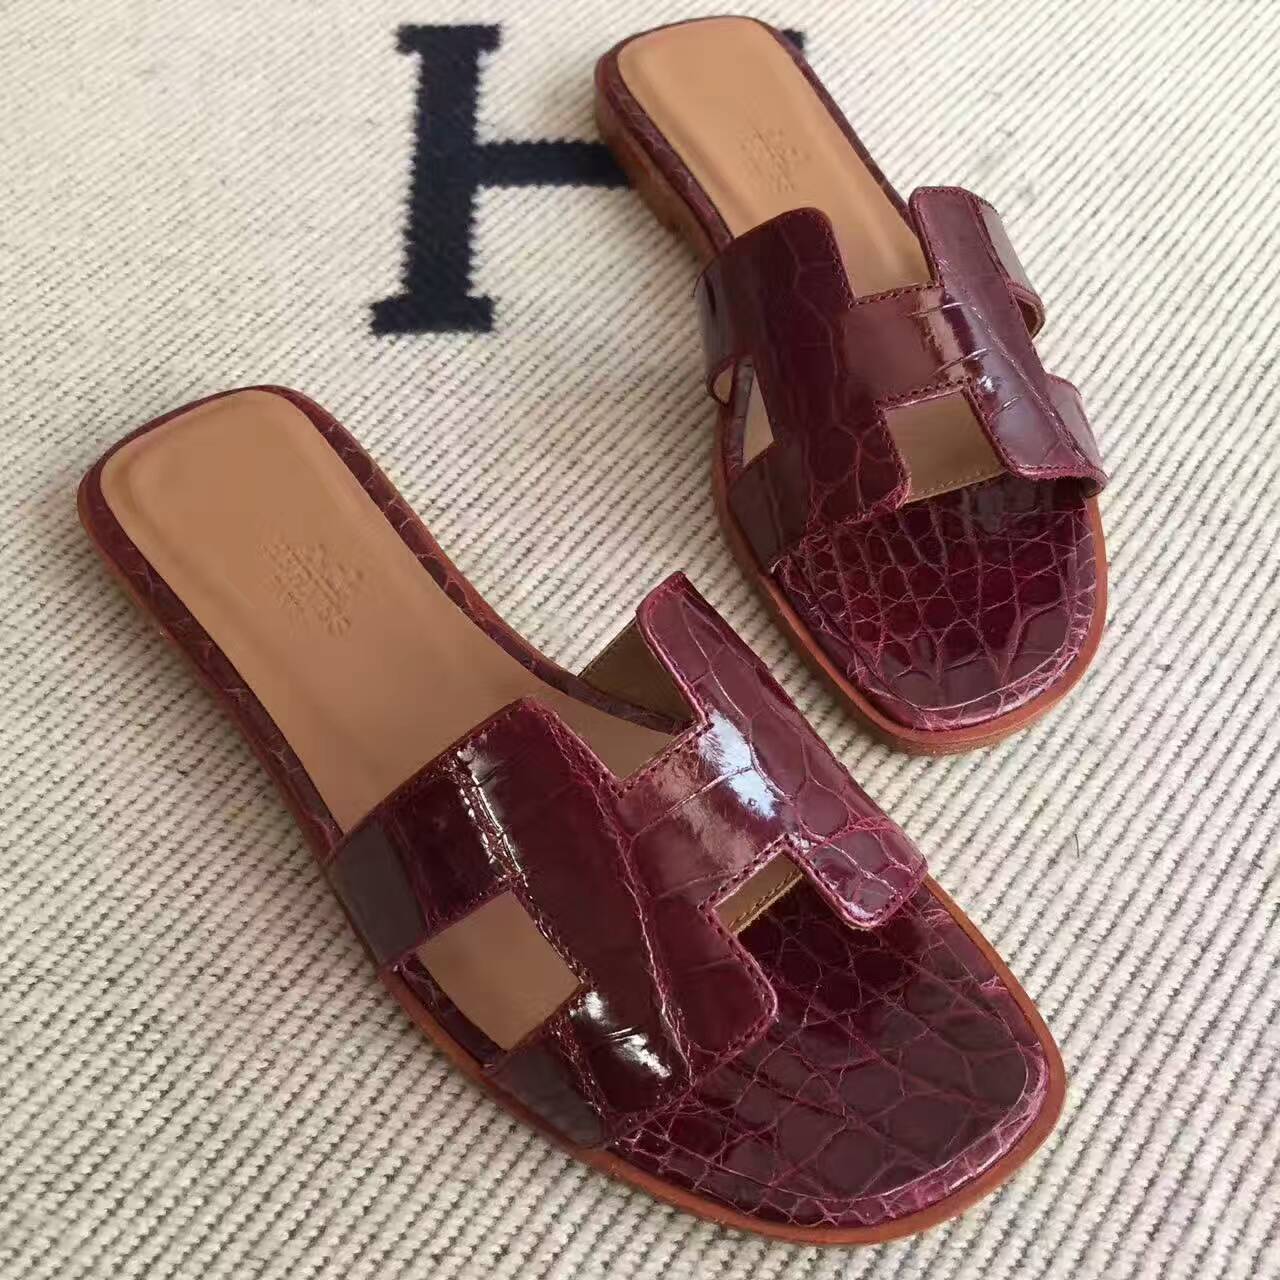 Hand Stitching Hermes Crocodile Leather Sandals Shoes in CK57 Bordeaux Size36